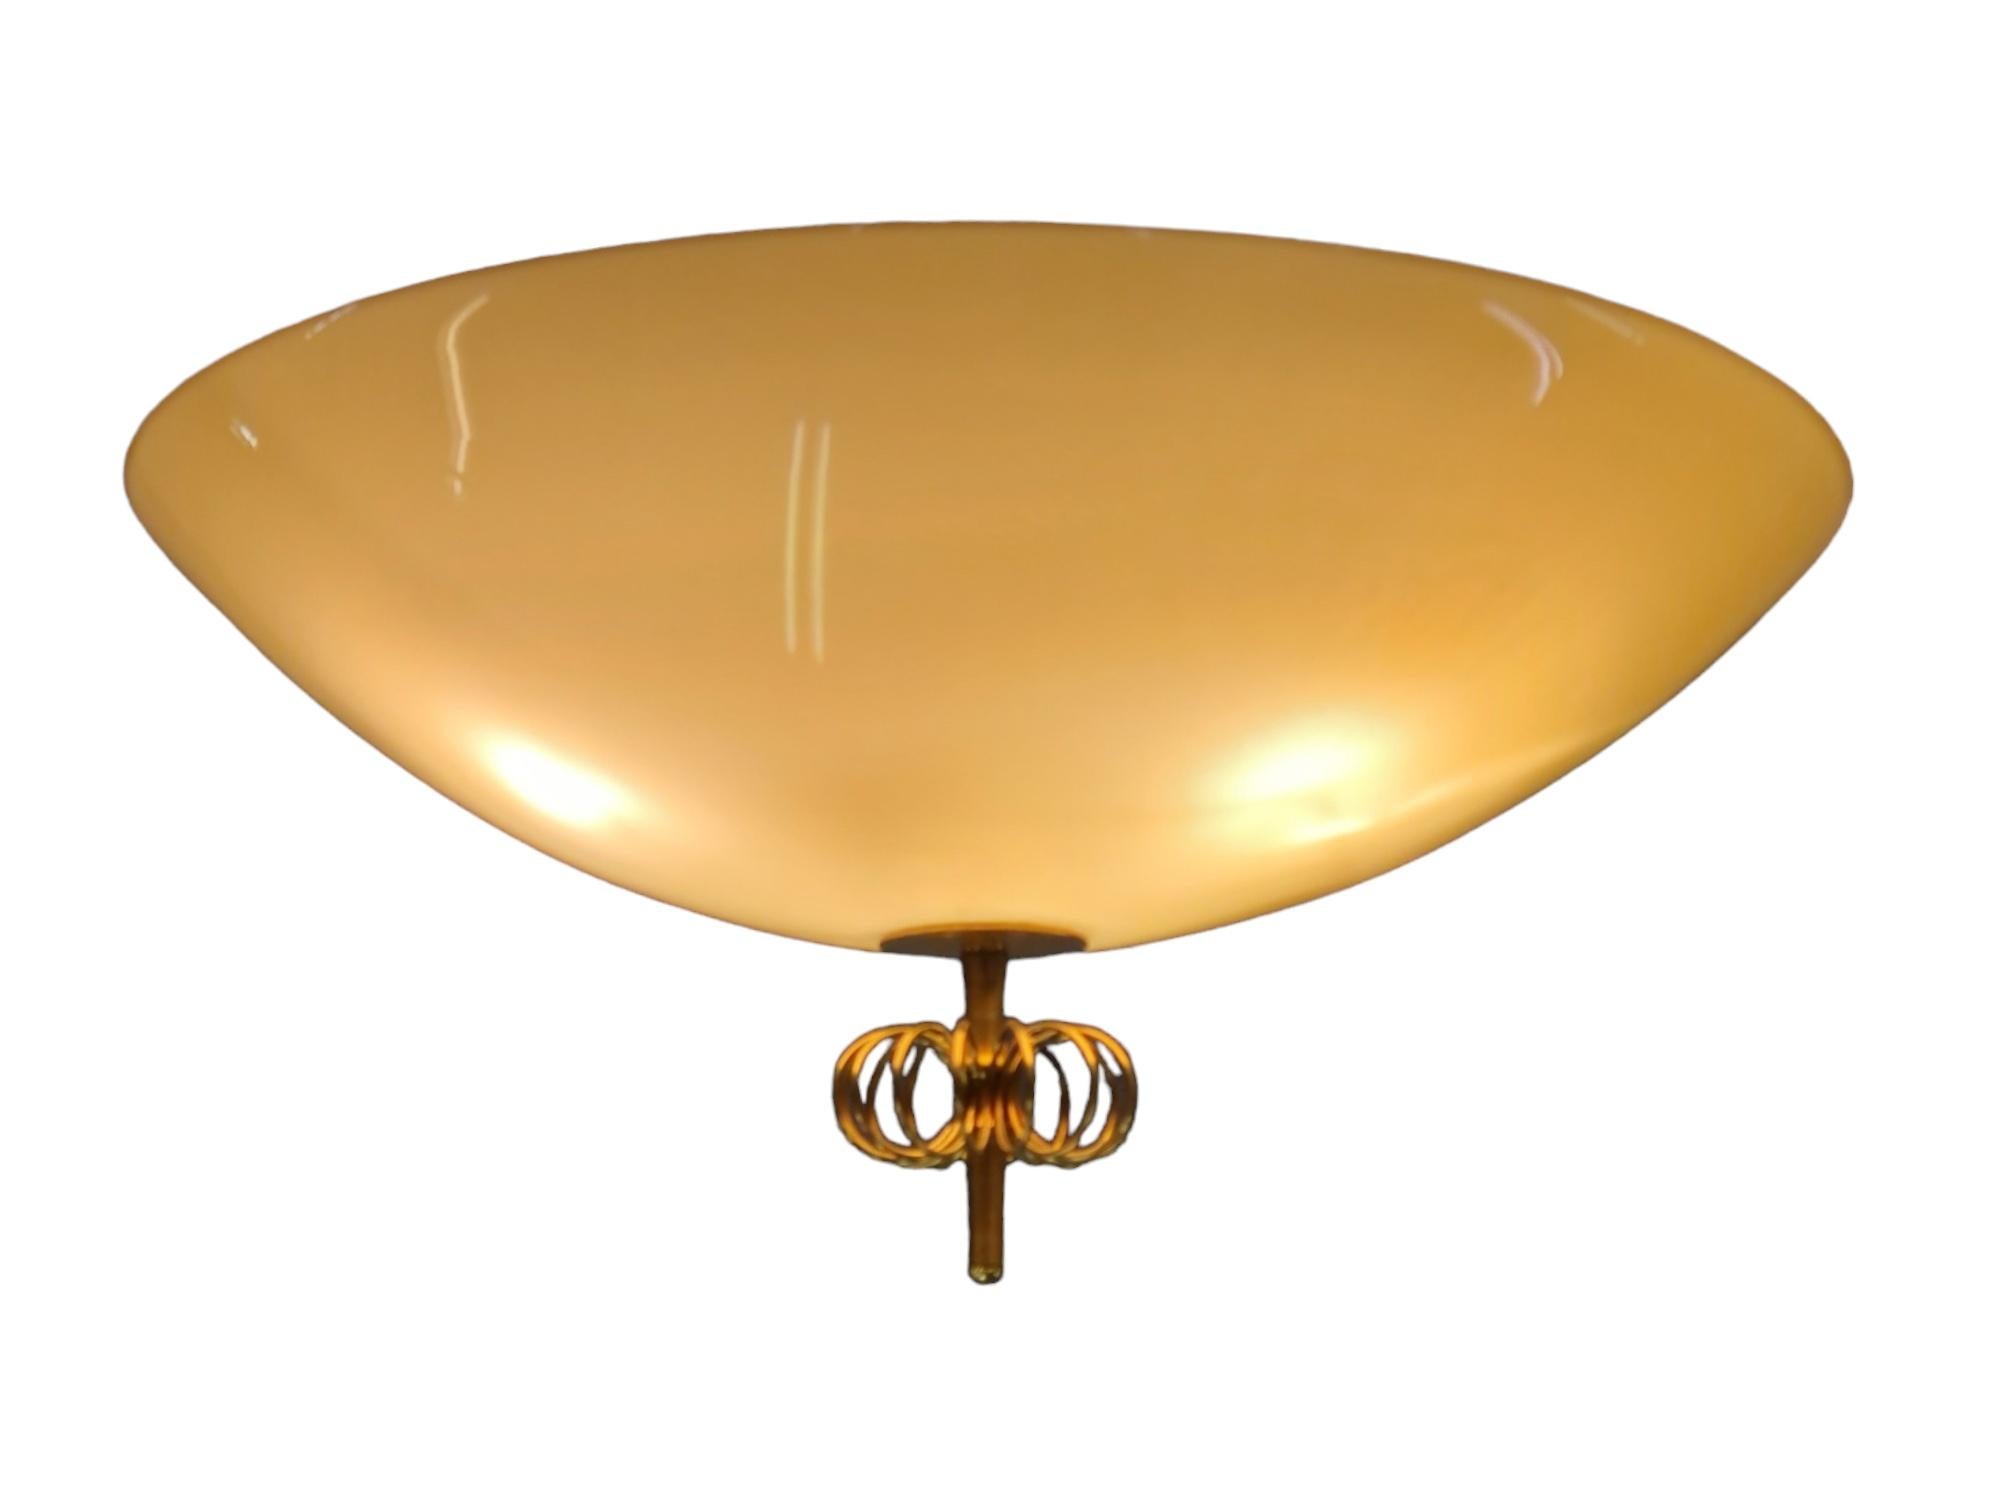 Blown Glass Paavo Tynell Ceiling Lamp Model Number 2093 For Idman. For Sale